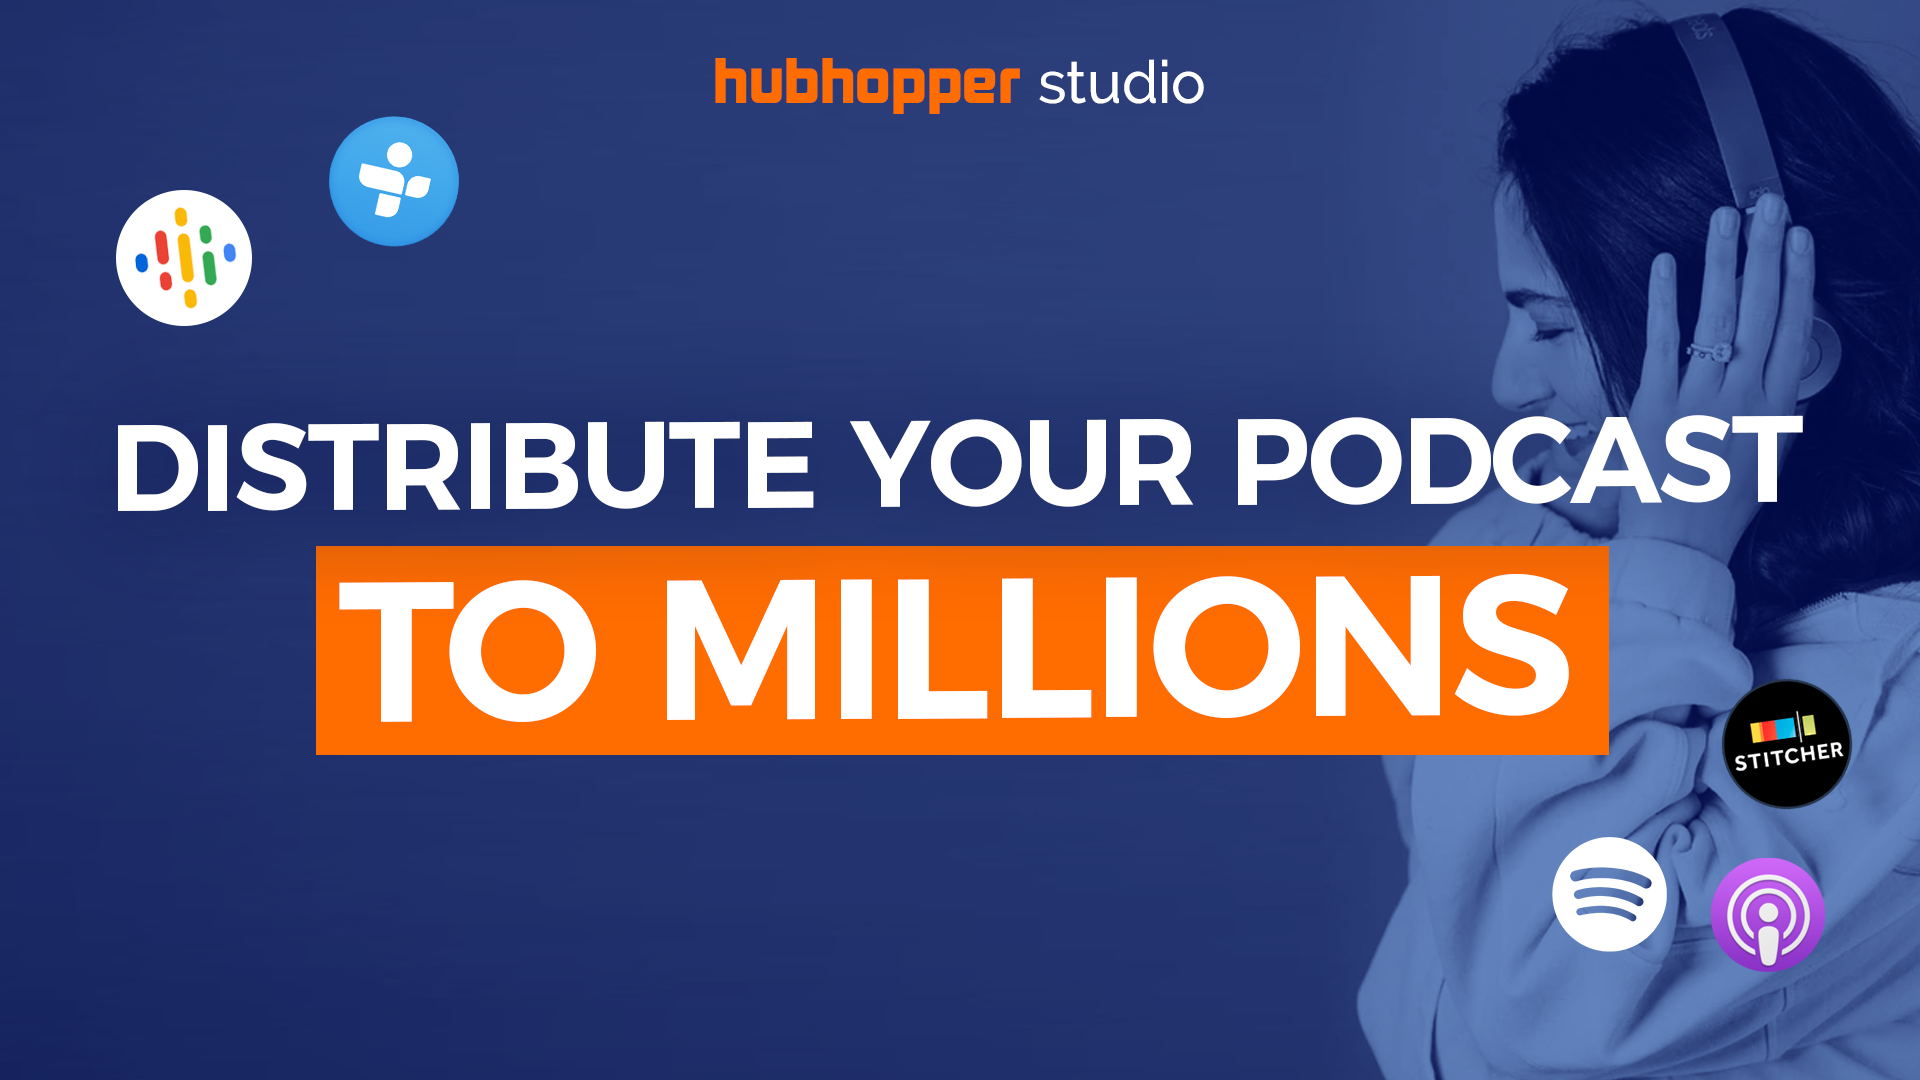 Distribute your podcast with Hubhopper on Spotify, Google Podcasts, Apple Podcasts